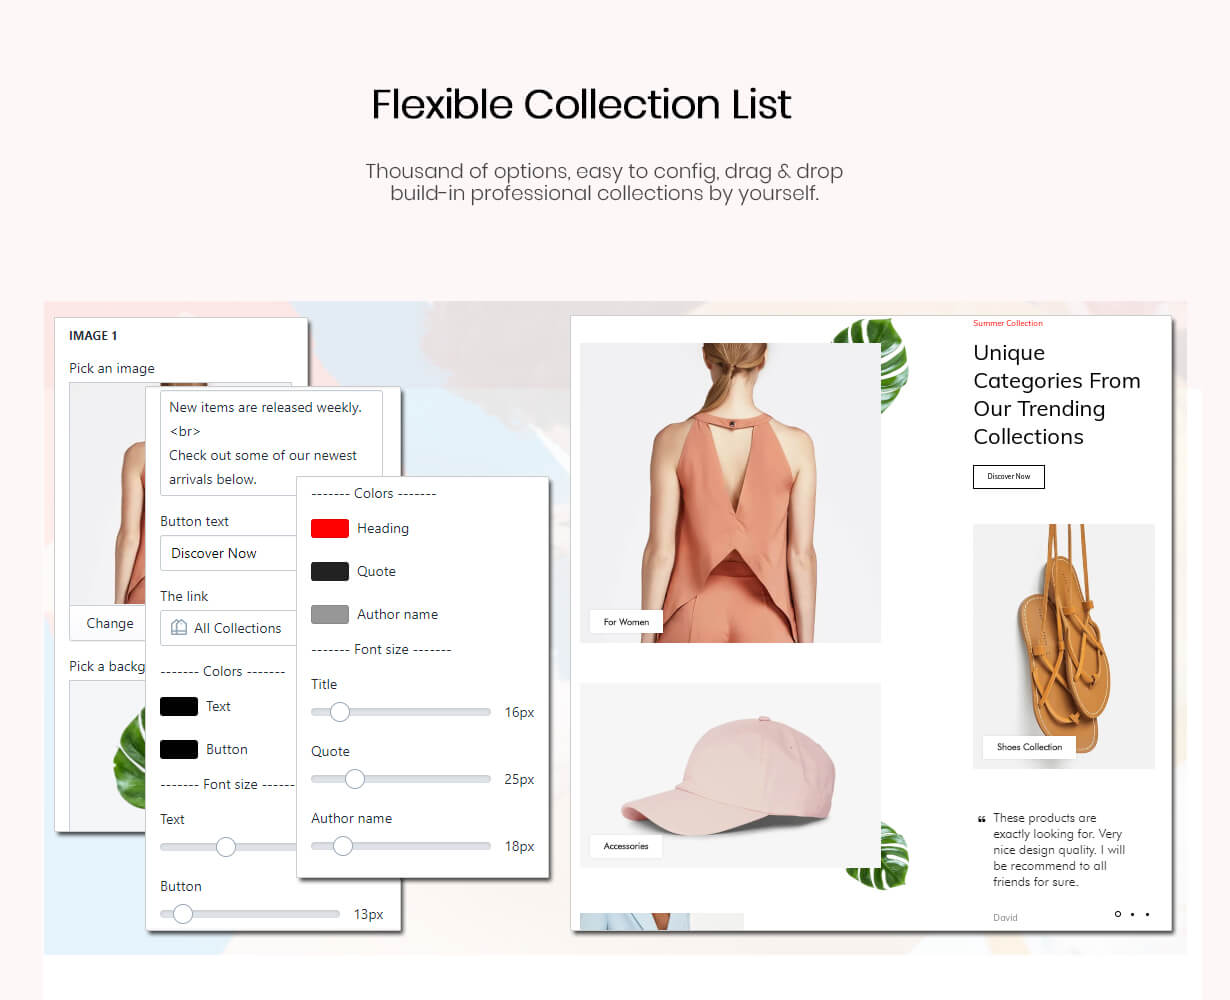 Flexible collection list section